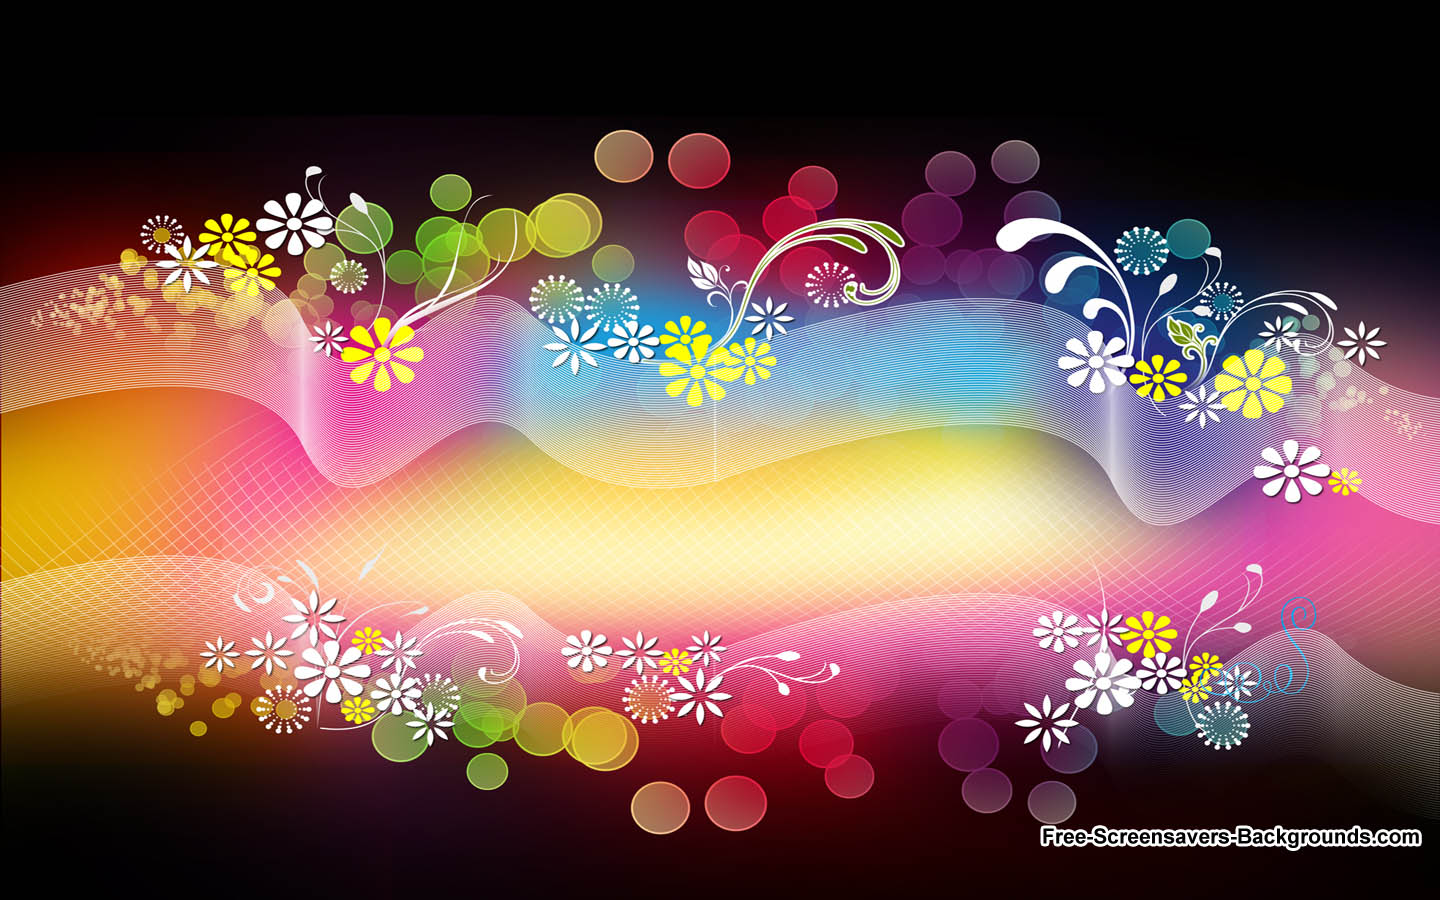 Rainbow   Free Screensavers and Backgrounds